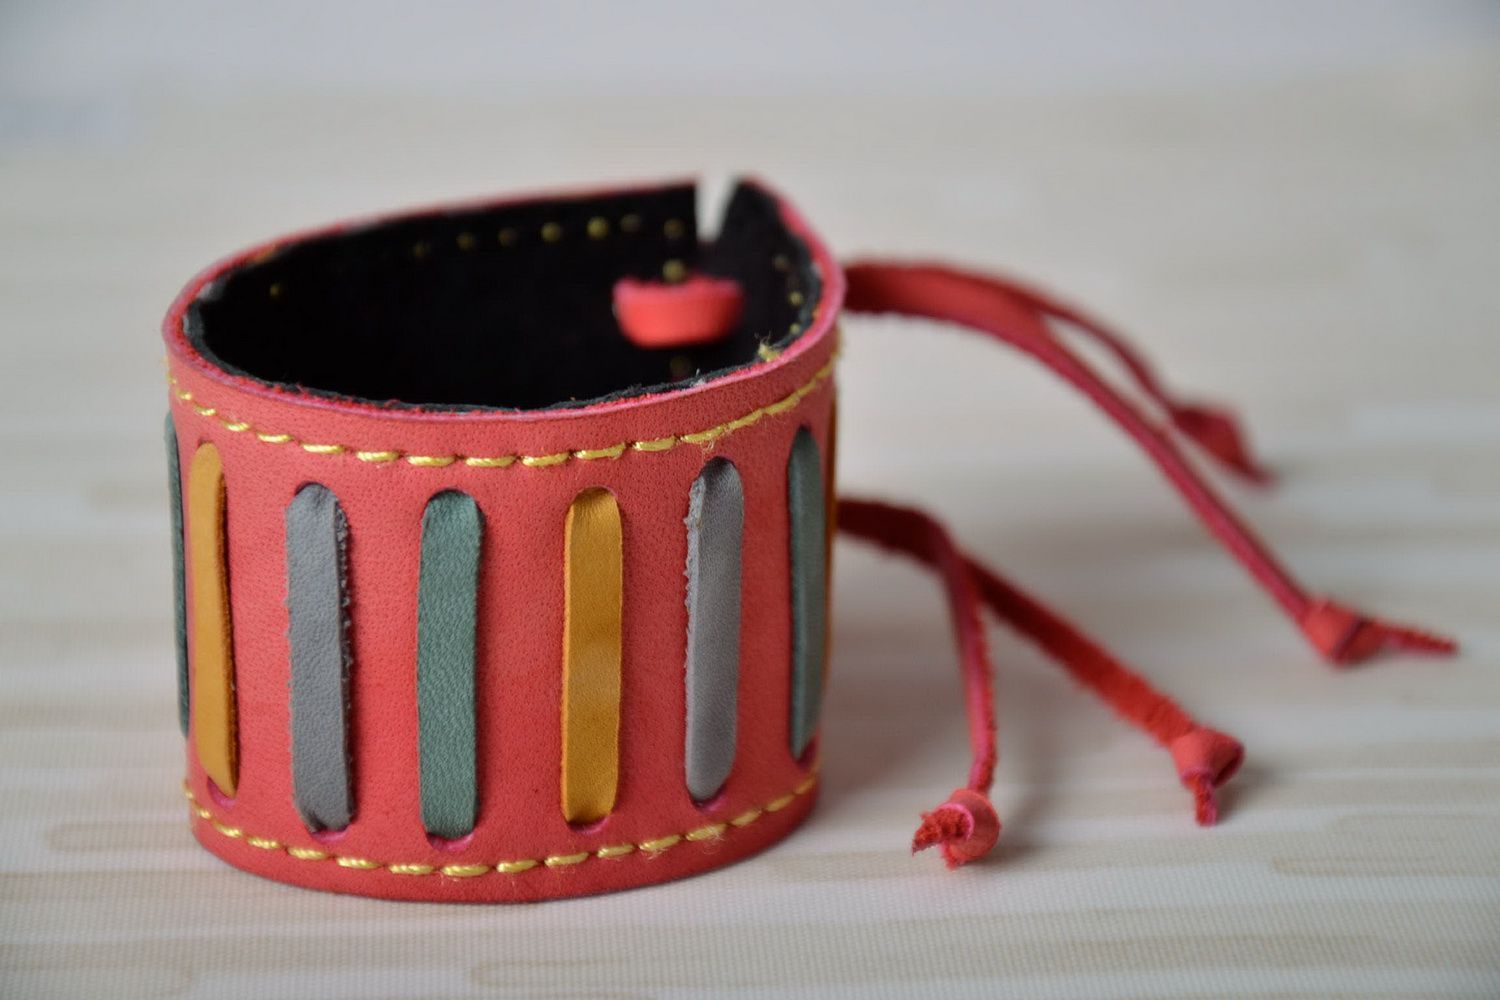 Leather bracelet with a cord photo 1